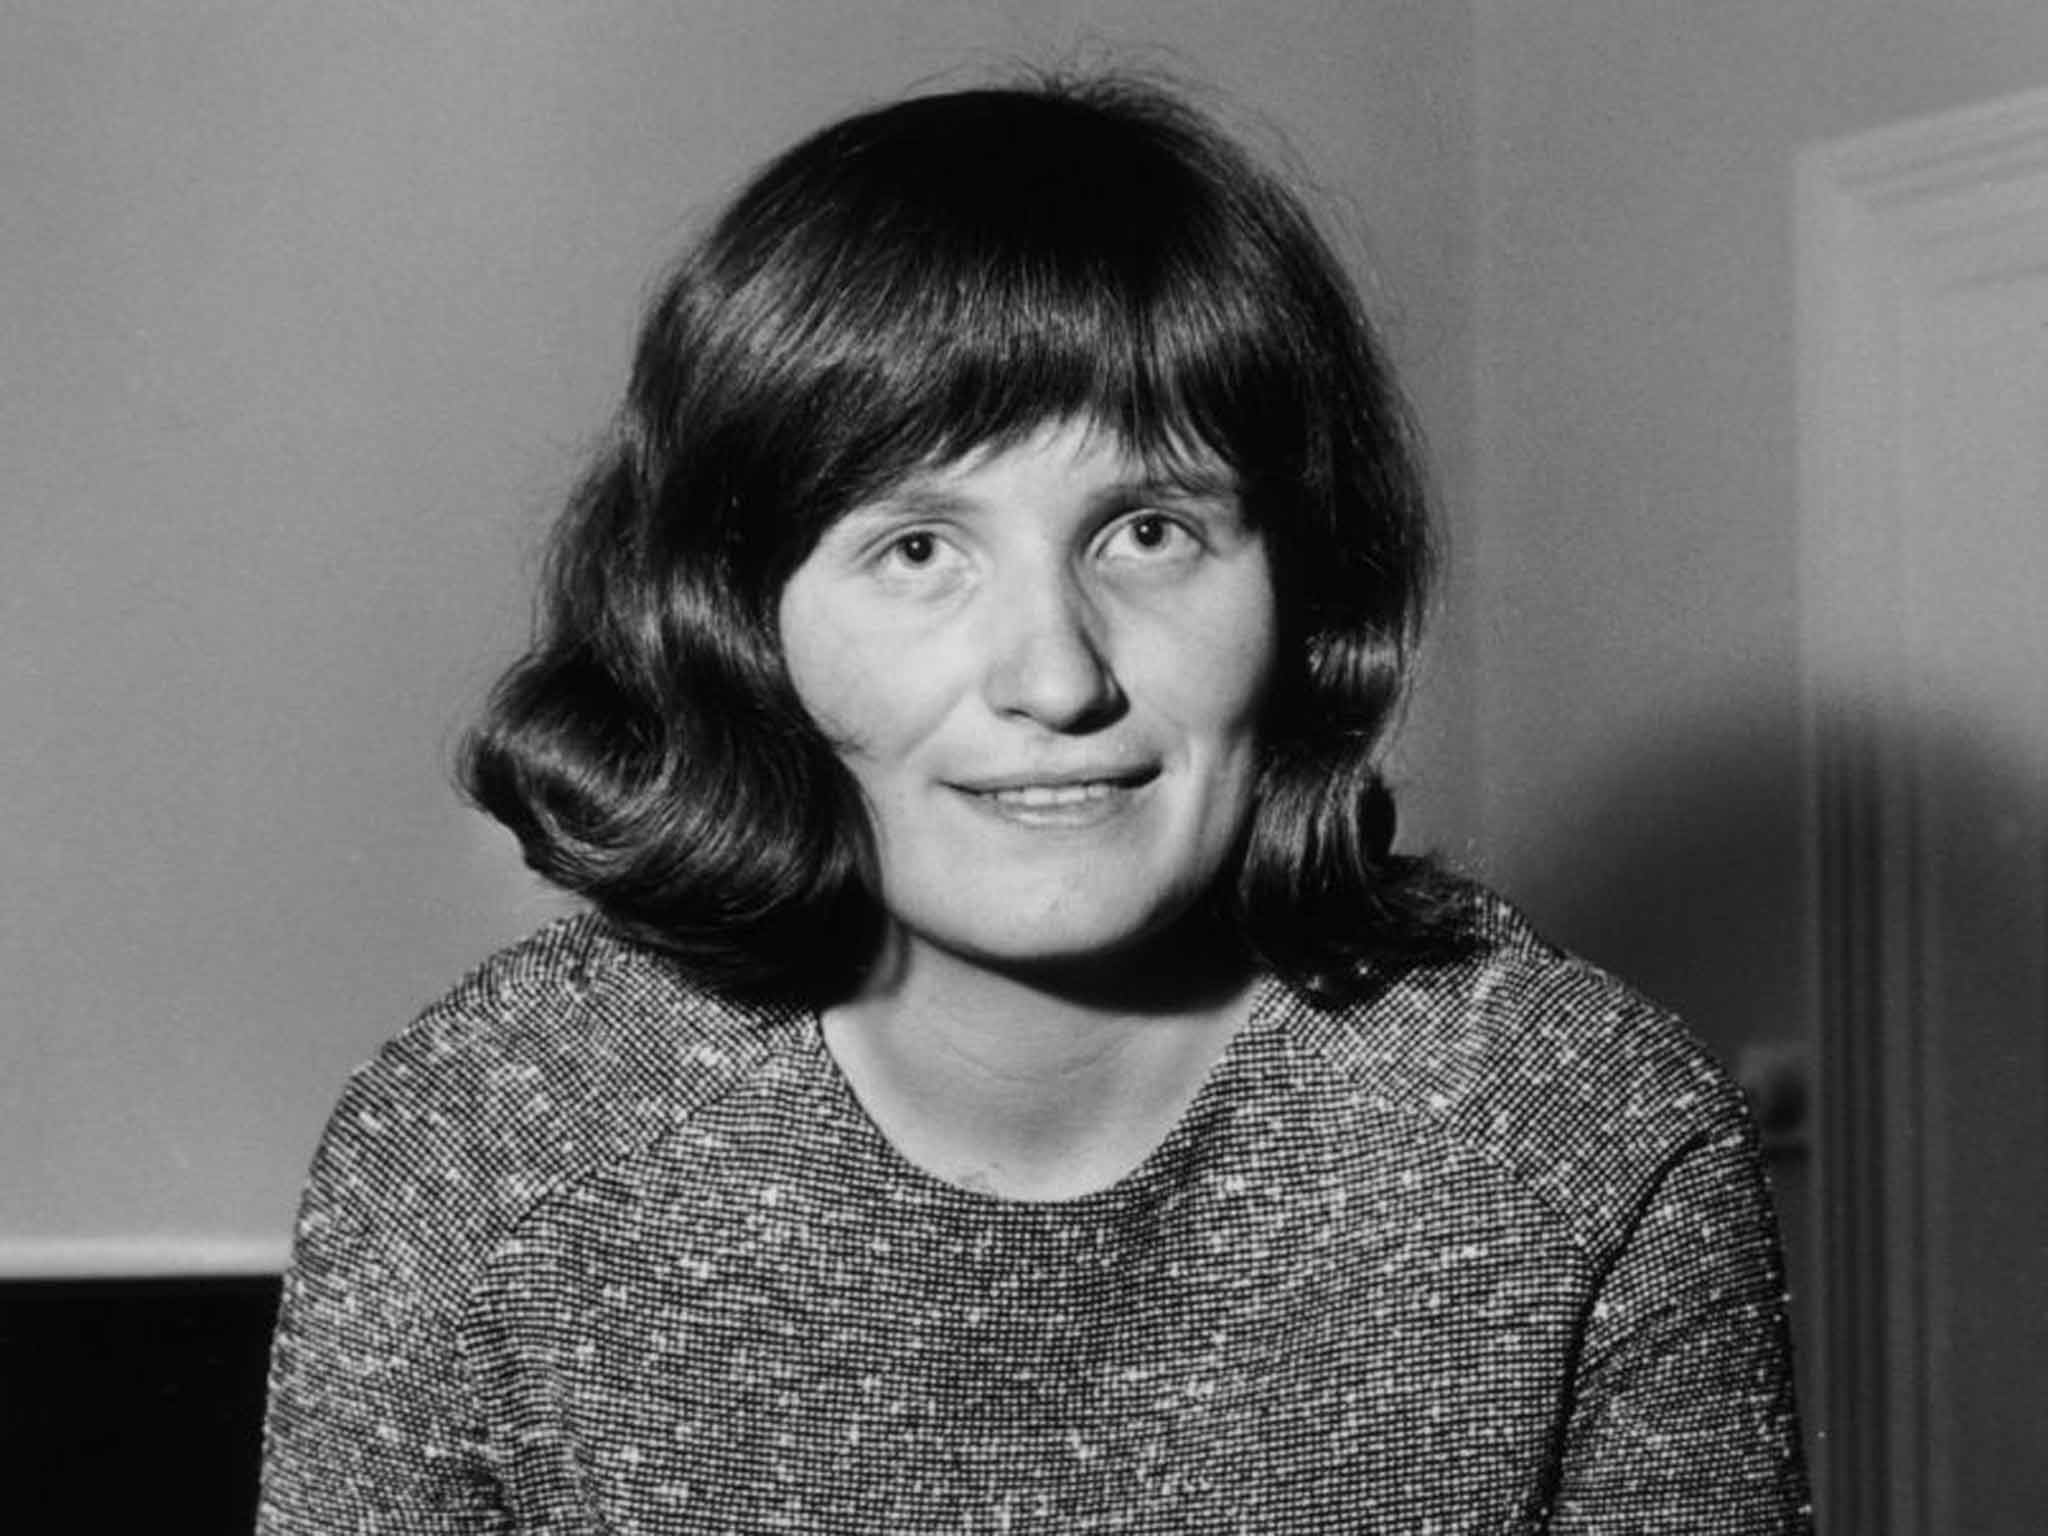 Forster in 1964: she had recently left her teaching job to write full-time